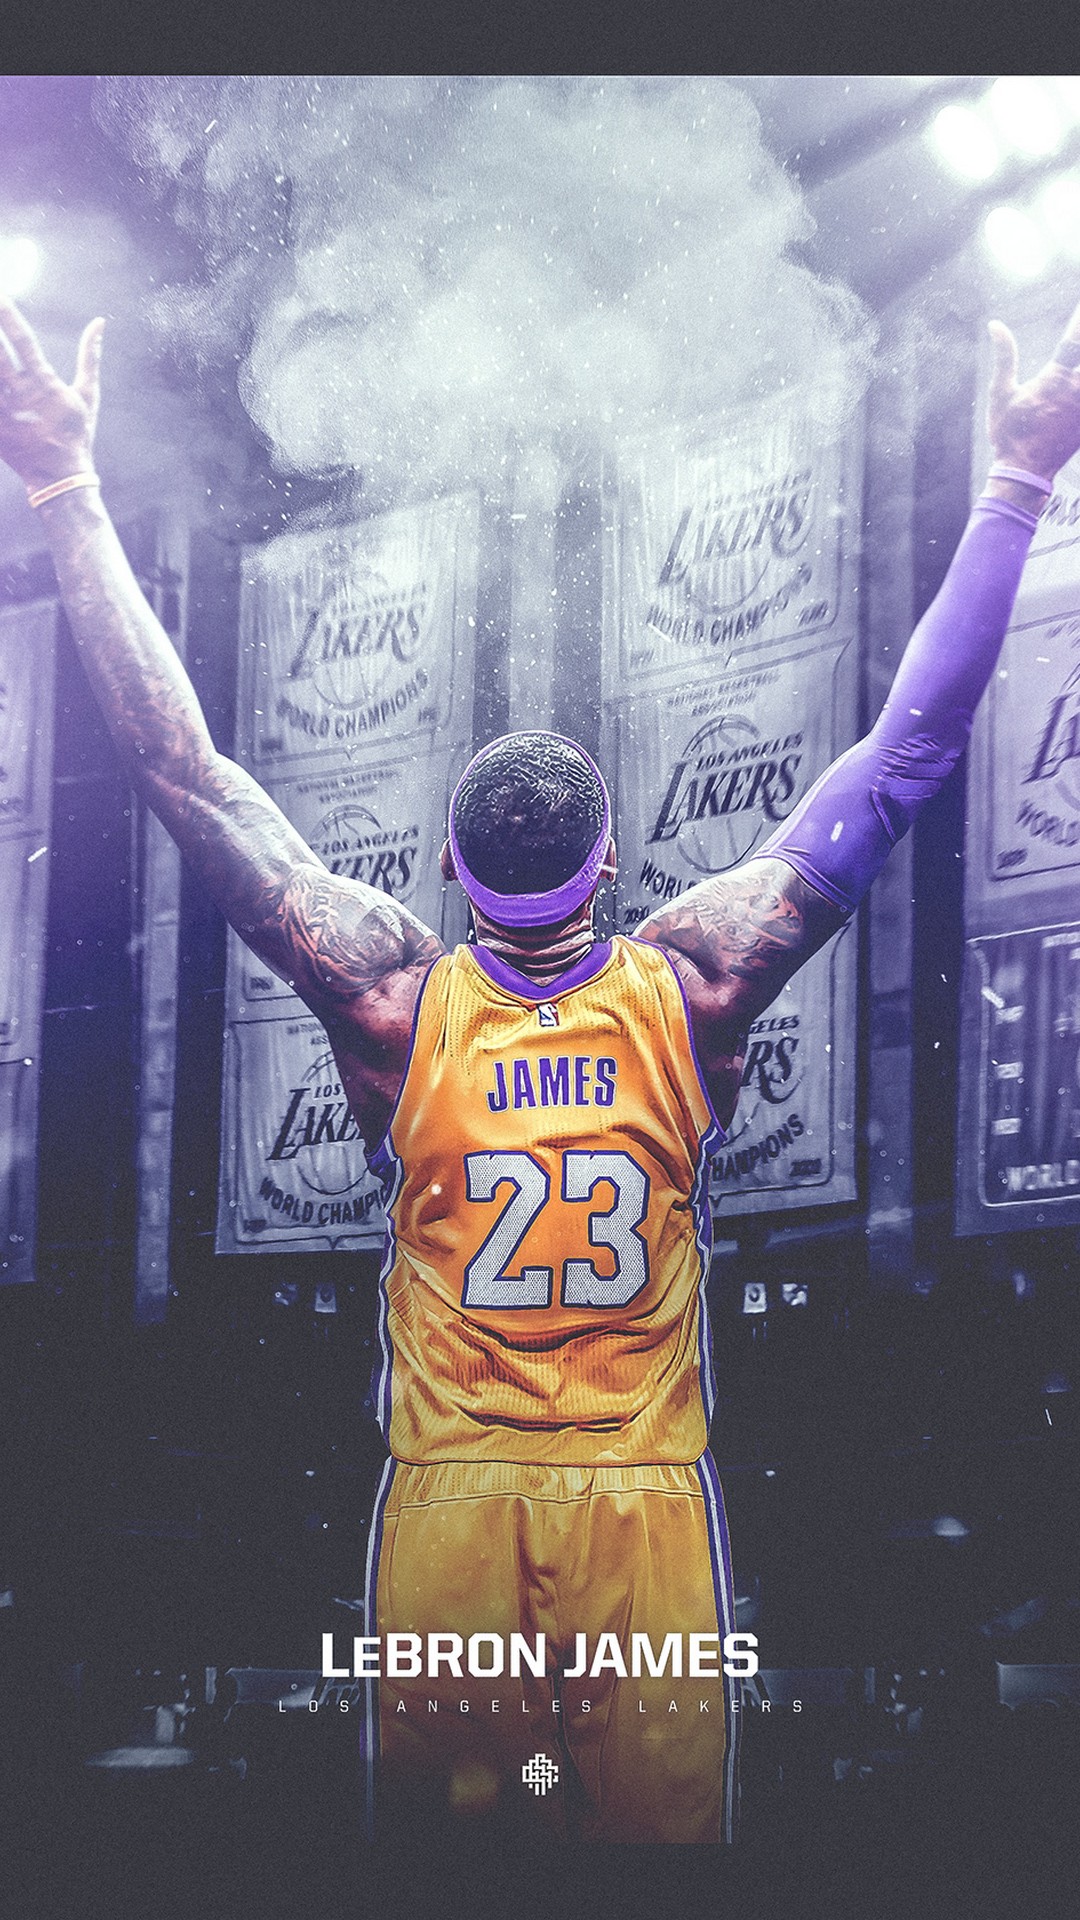 LeBron James LA Lakers HD Wallpaper For iPhone with high-resolution 1080x1920 pixel. You can use this wallpaper for your Desktop Computer Backgrounds, Windows or Mac Screensavers, iPhone Lock screen, Tablet or Android and another Mobile Phone device